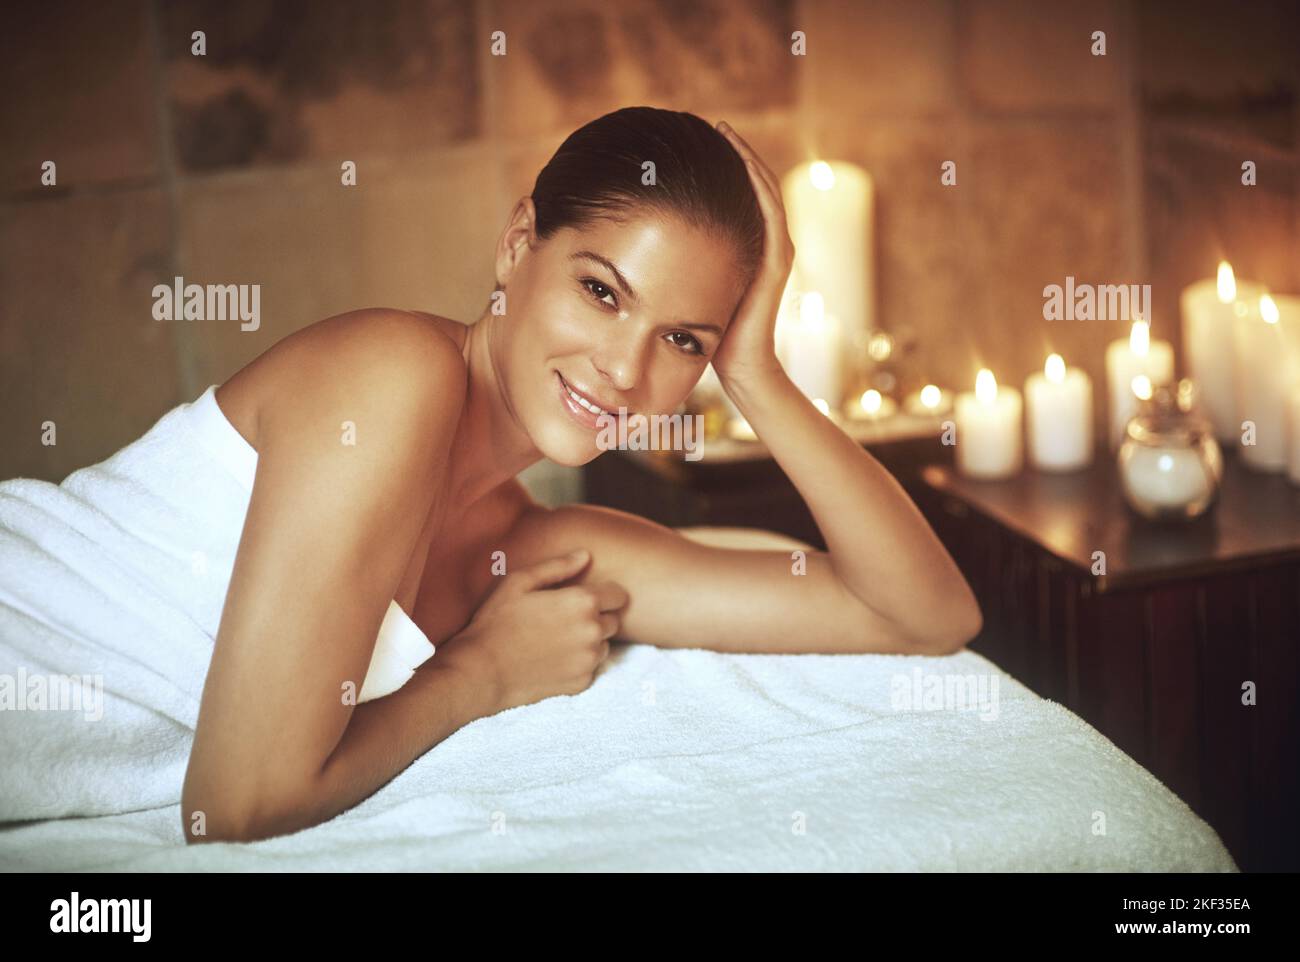 Do more of what makes you happy. Closeup shot of a young woman relaxing during a spa treatment. Stock Photo